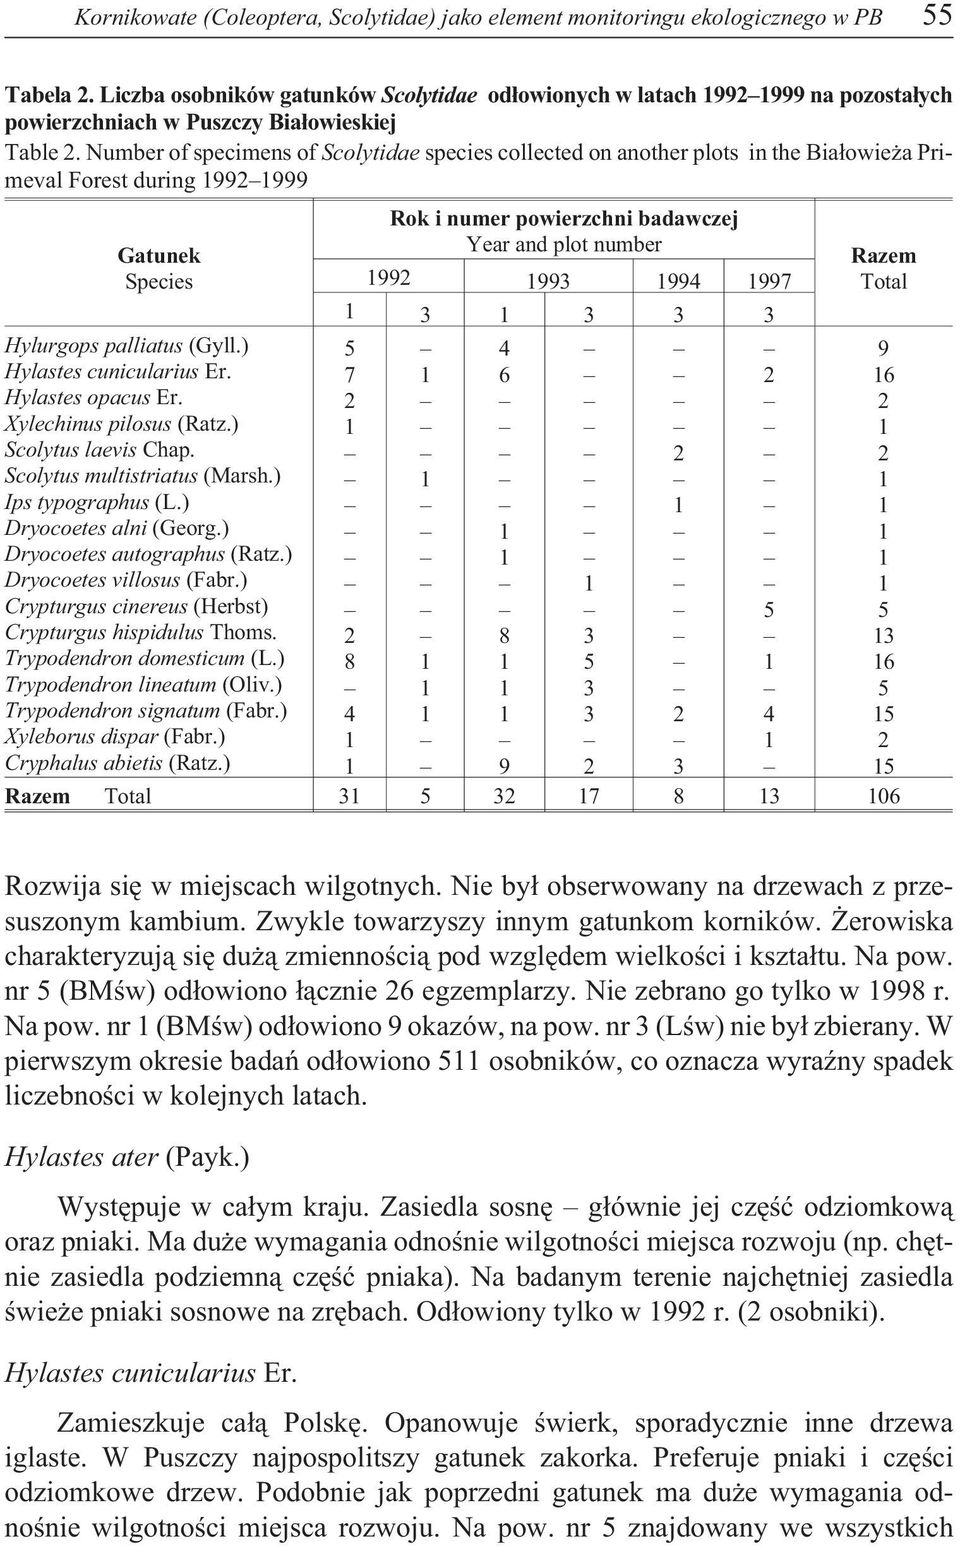 Number of specimens of Scolytidae species collected on another plots in the Bia³owie a Primeval Forest during 99999 Gatunek Species Rok i numer powierzchni badawczej Year and plot number 99 99 99 997